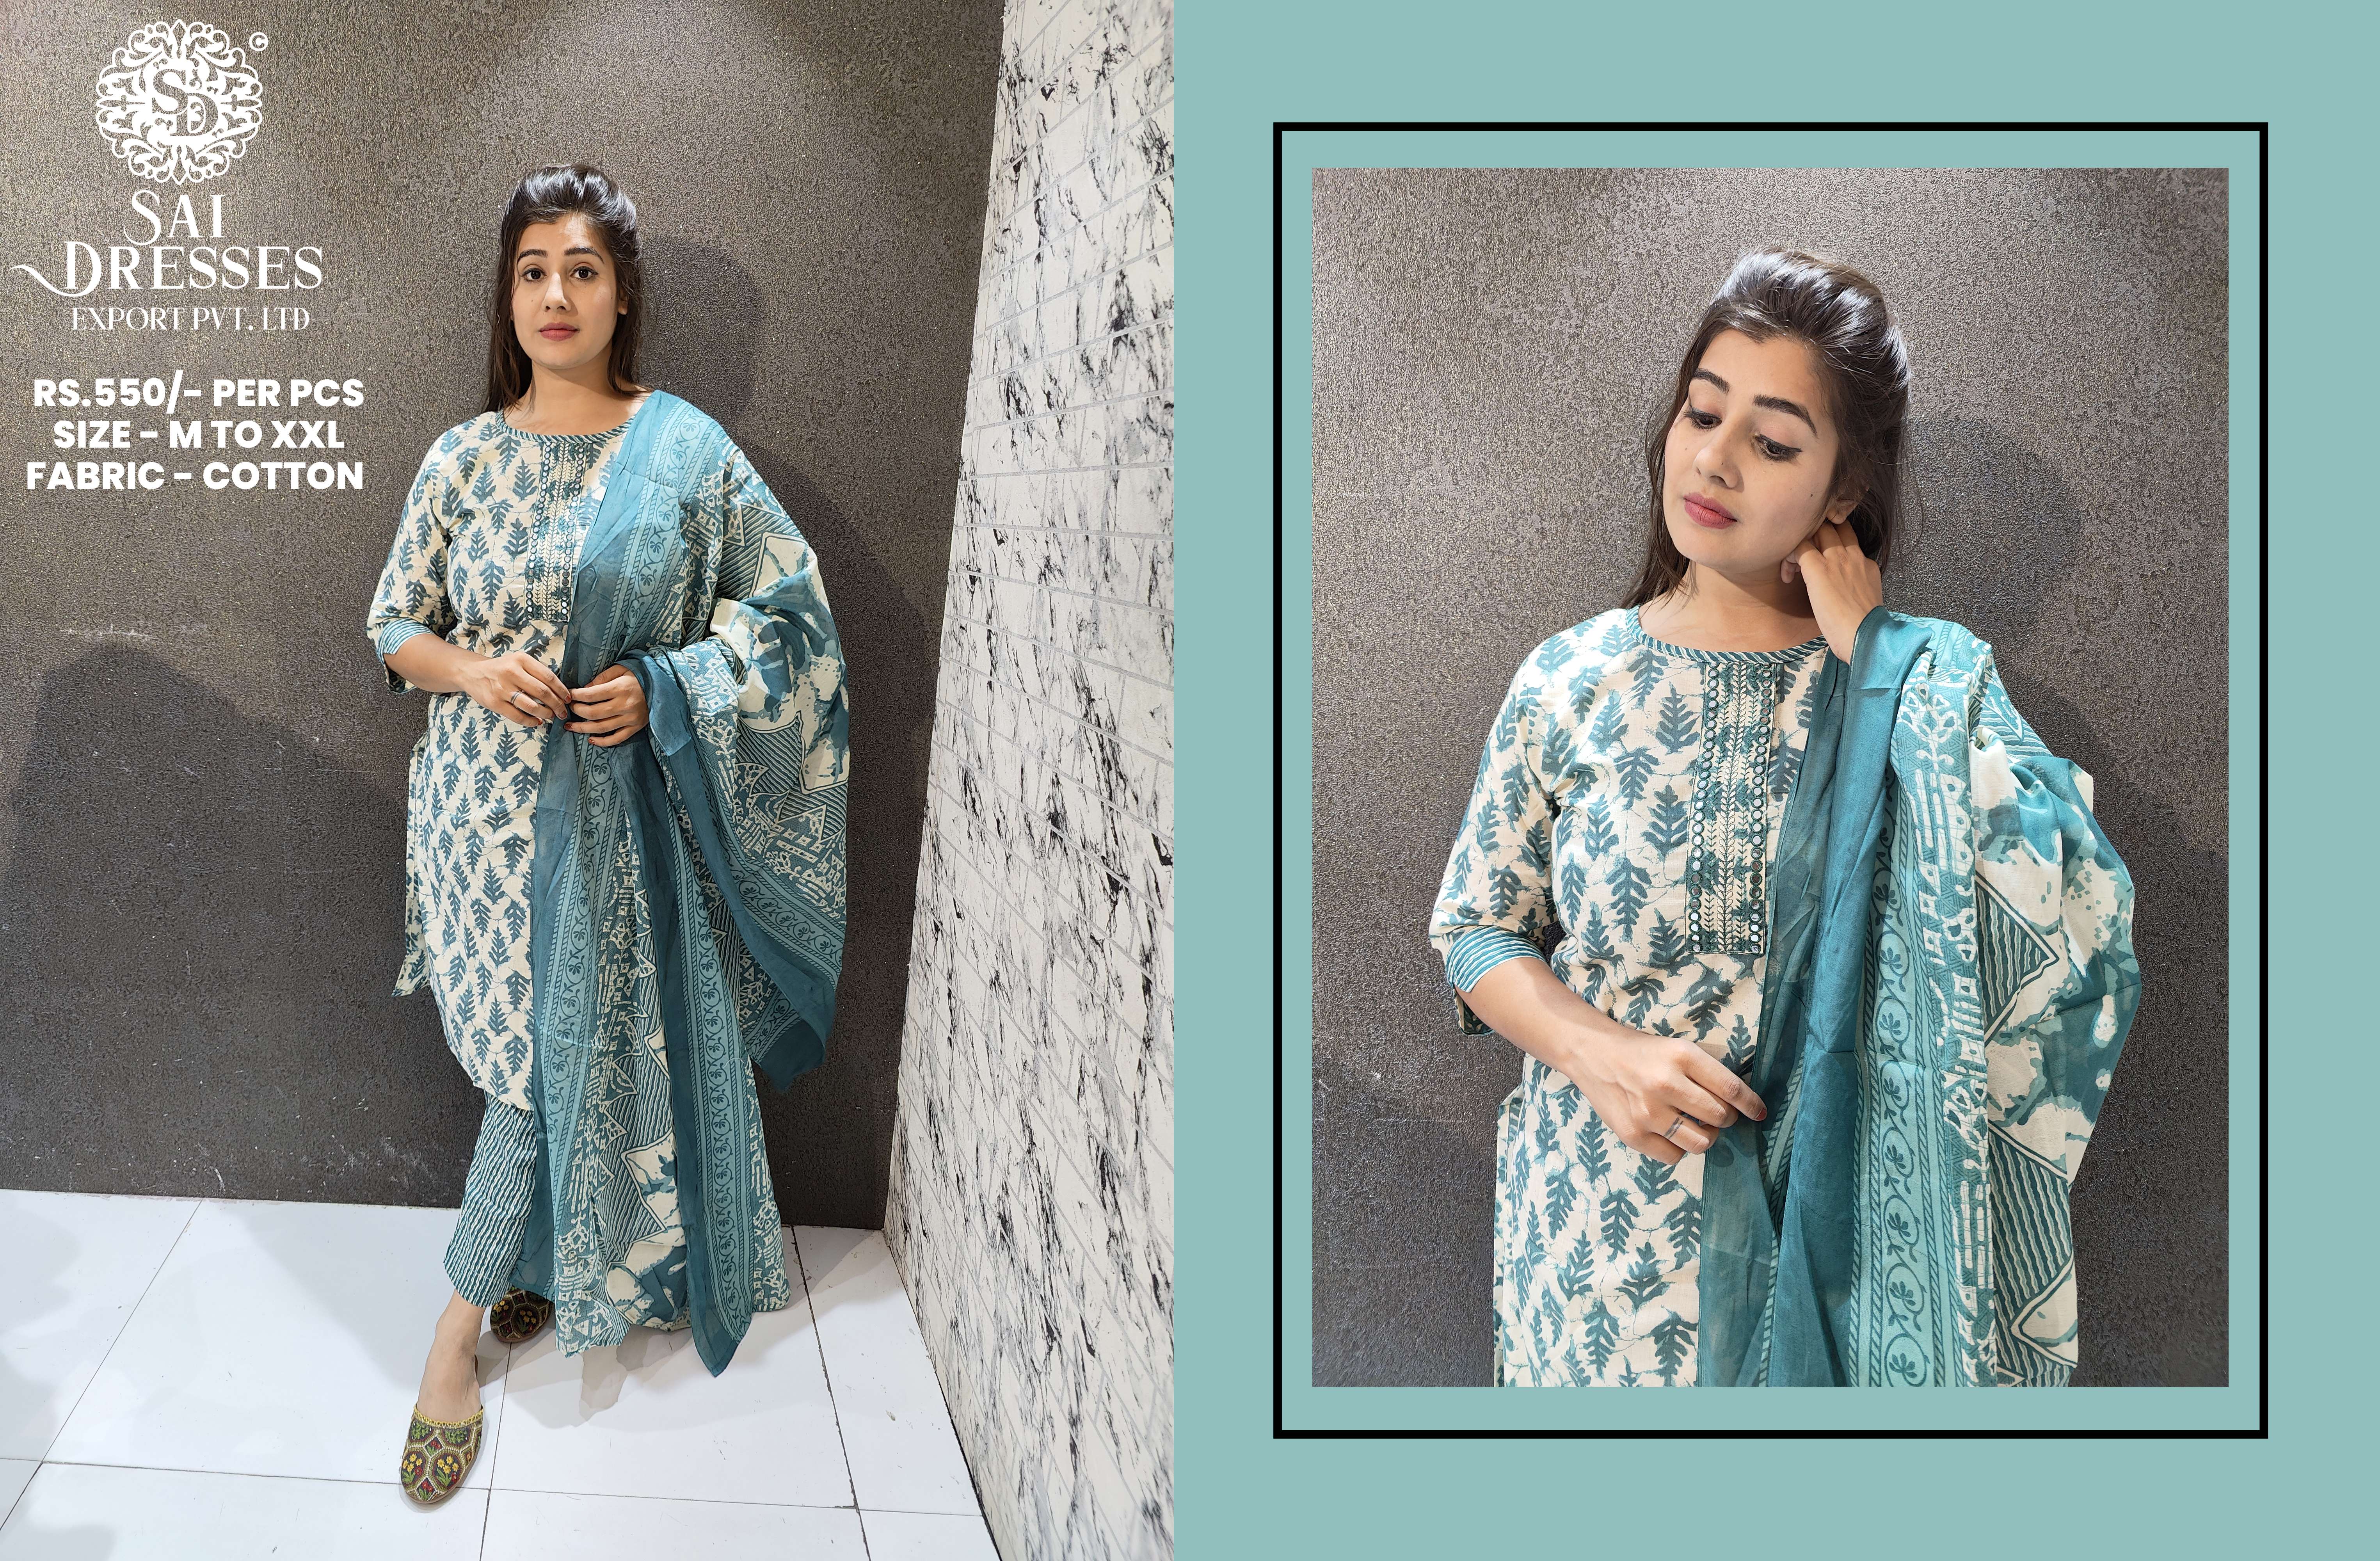 SAI DRESSES PRESENT D.NO 46 READY TO EXCLUSIVE DAILY WEAR PANT STYLE COTTON PRINTED 3 PIECE COMBO SUITS IN WHOLESALE RATE IN SURAT